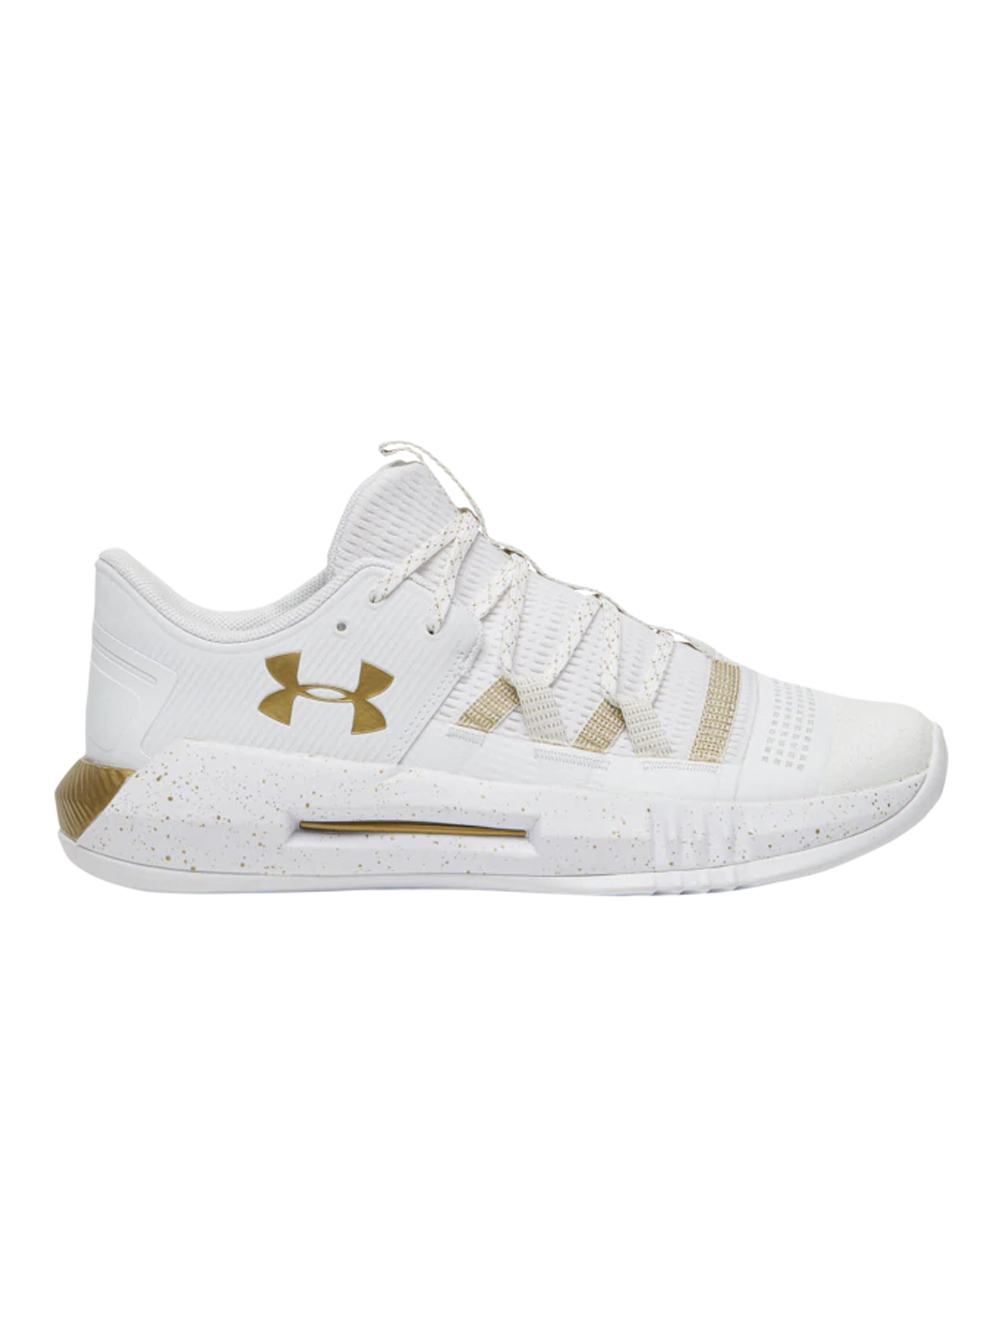 under armour shoes white and gold off 